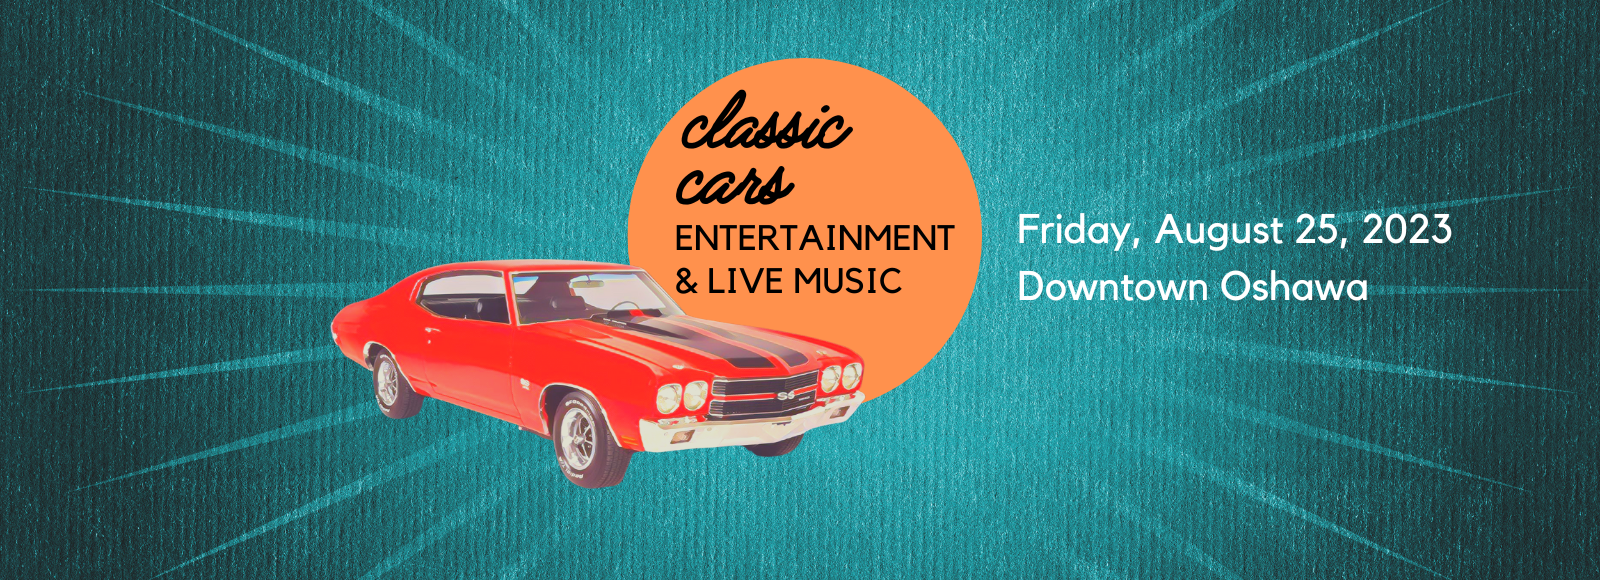 vintage red car with a sun that says classic cars, music and entertainment Friday August 26 4 p.m. to 9 p.m.